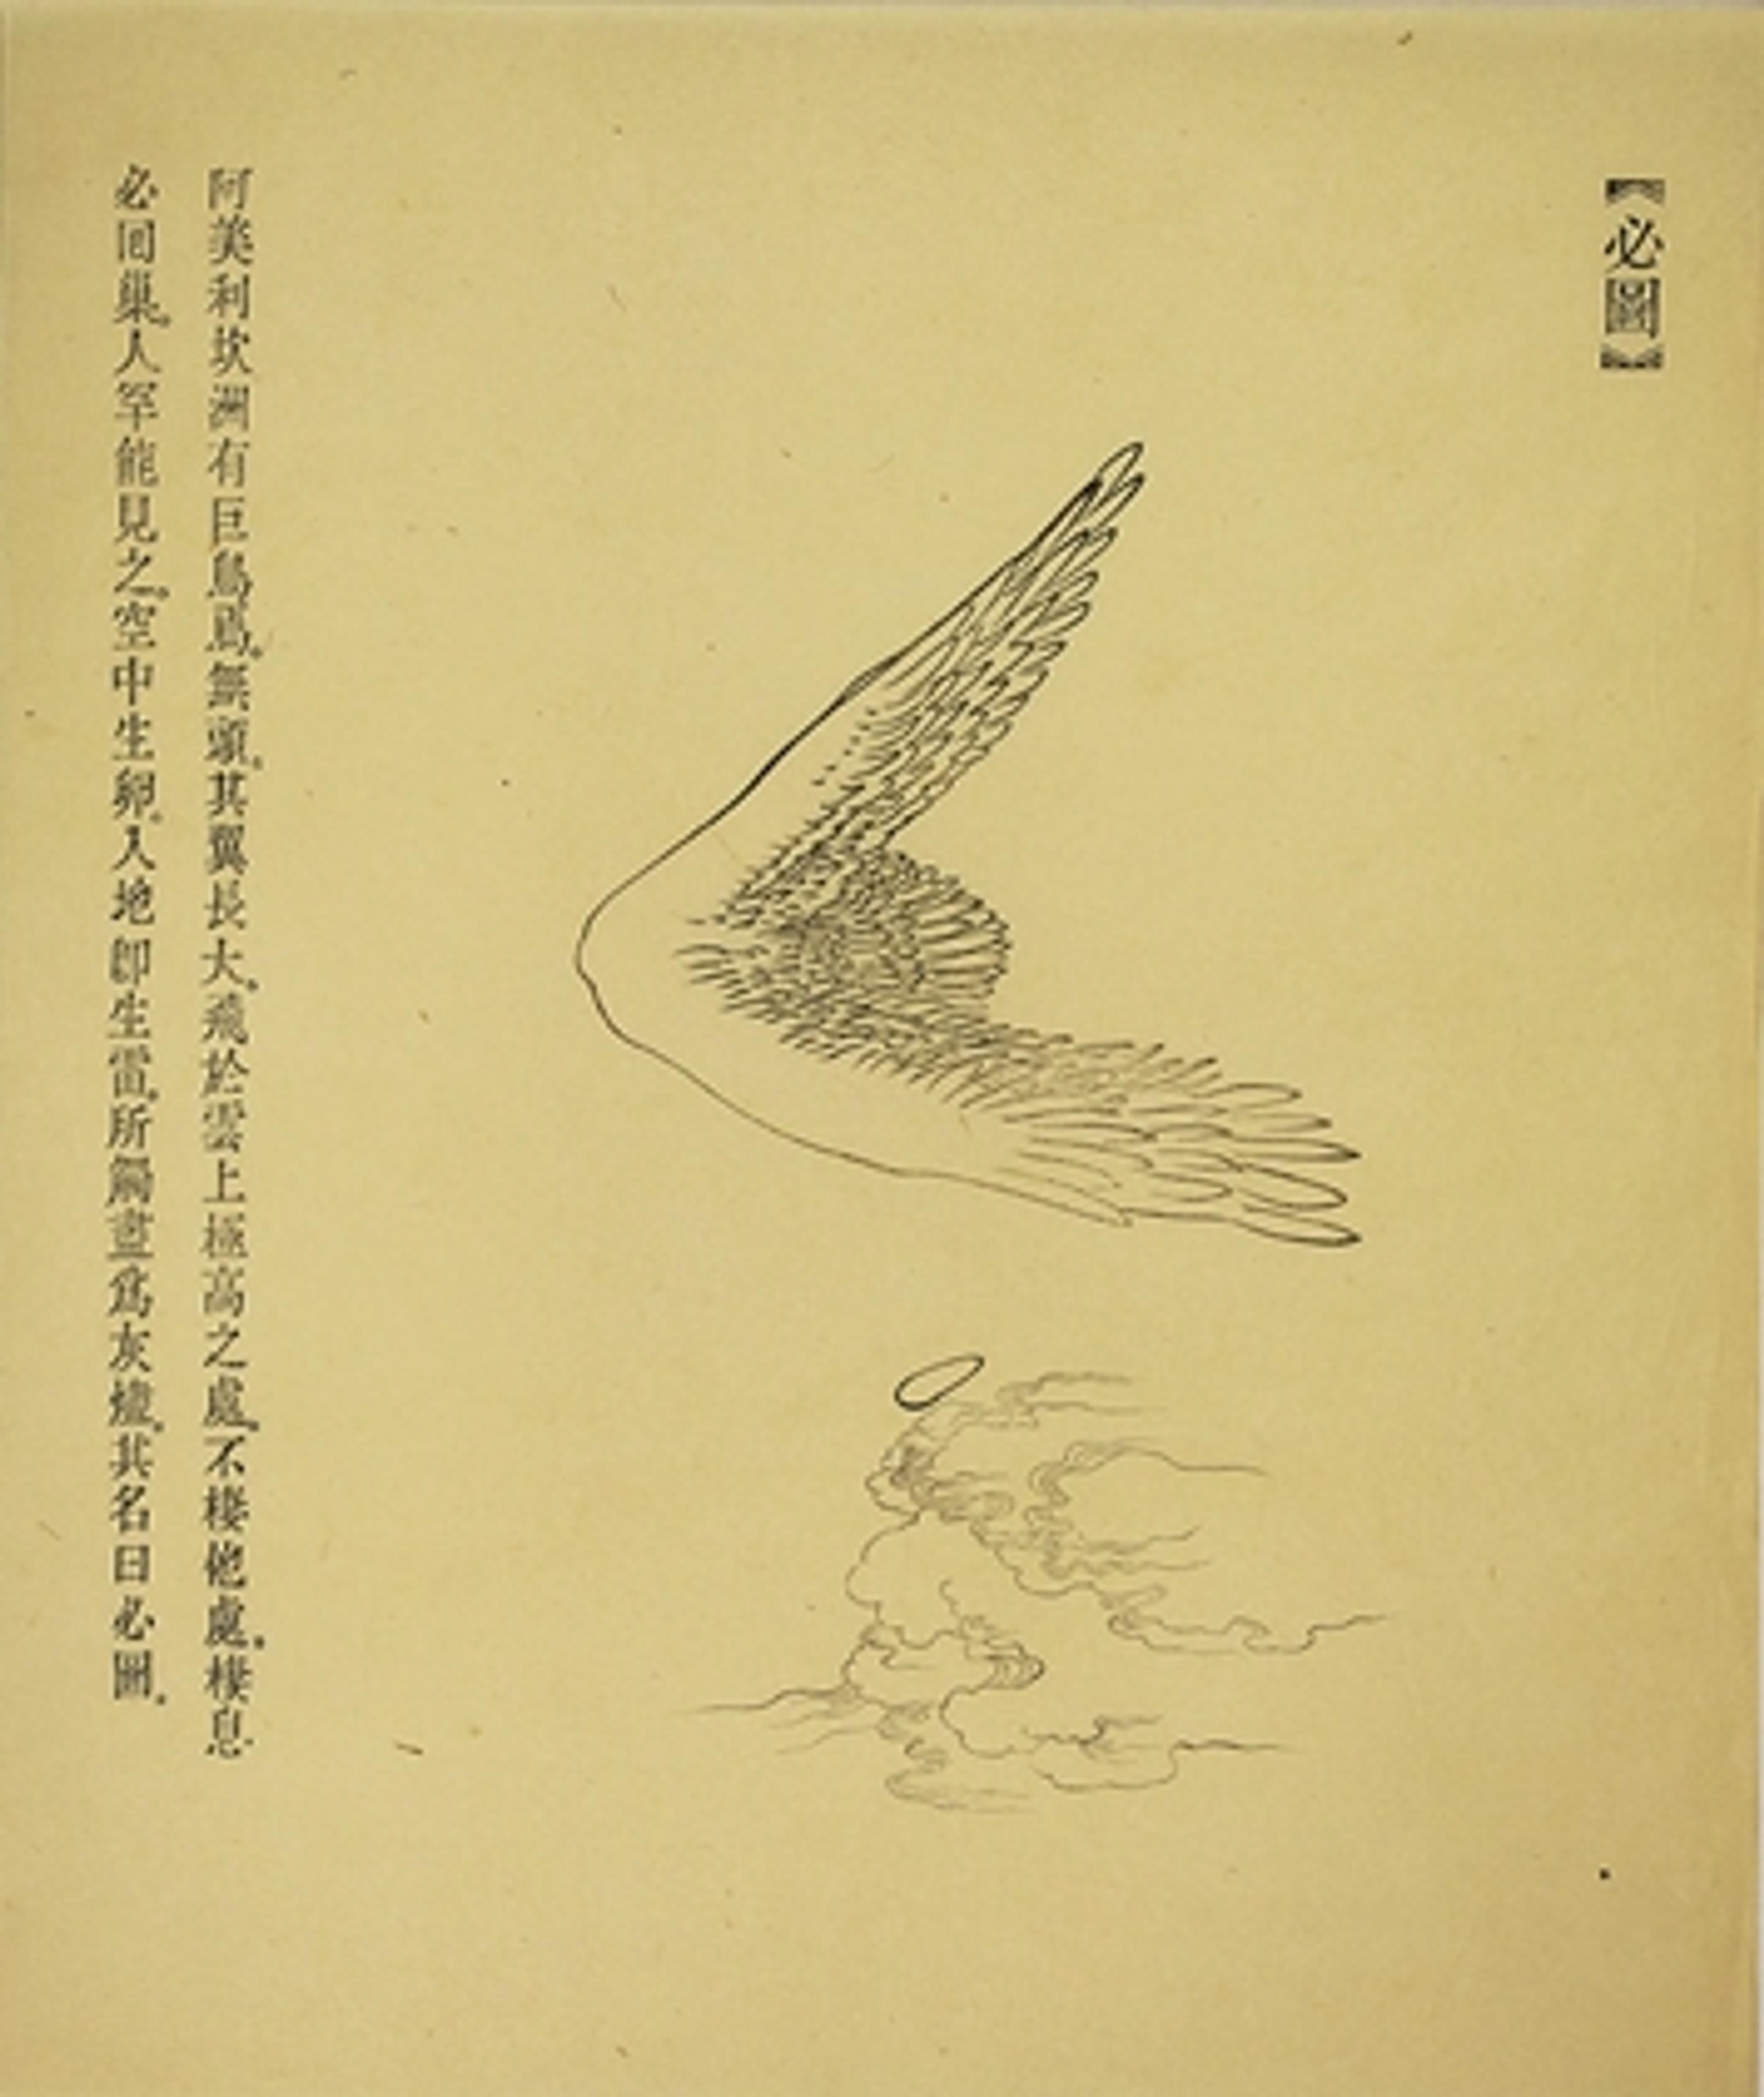 Leaf from album showing winged creature